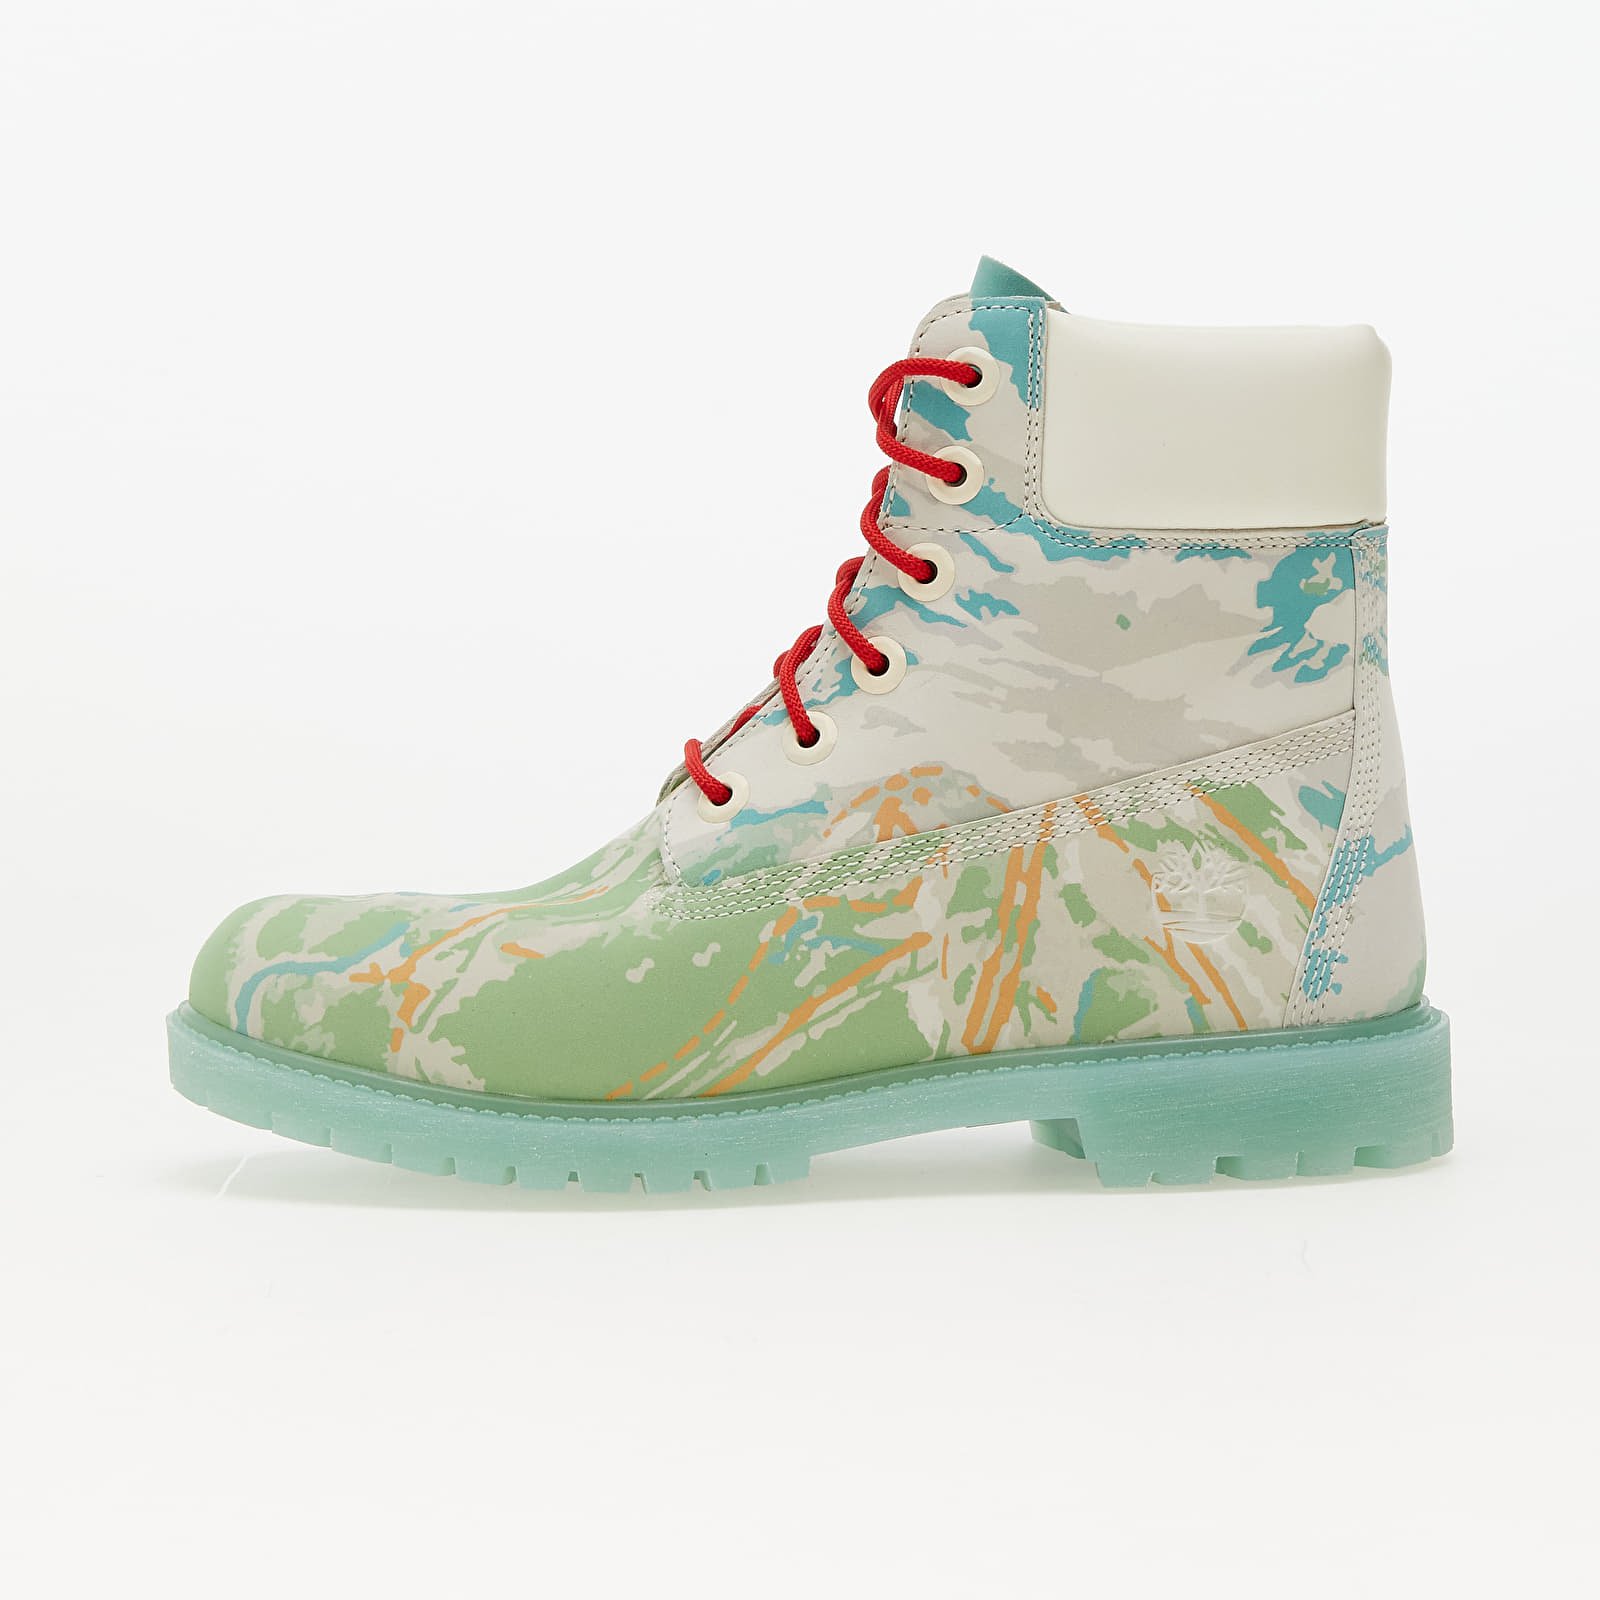 Timberland - 6 inch lace up waterproof boot multicolor